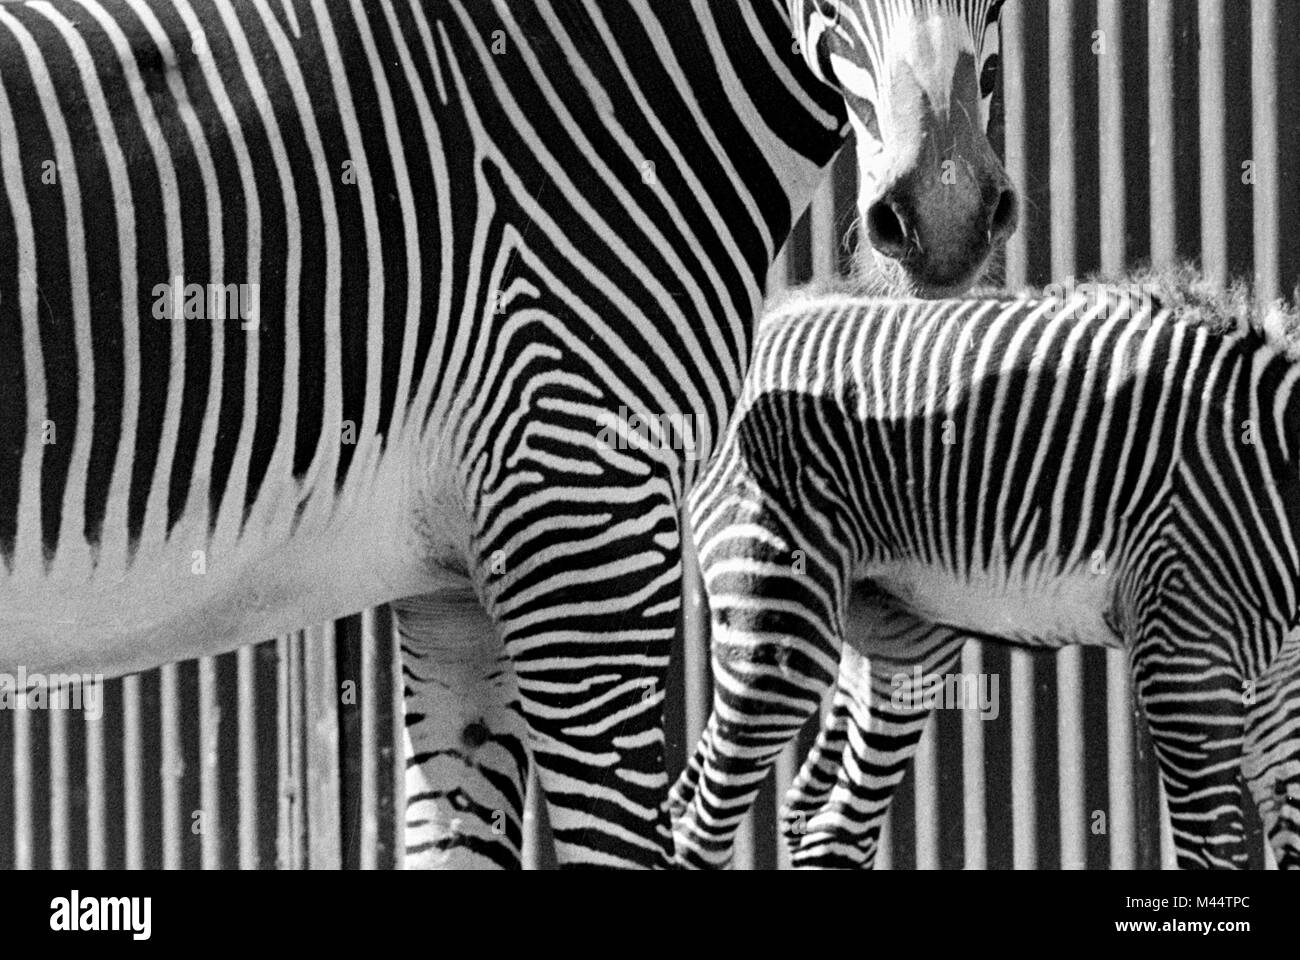 Abstract view of two zebras along a fence at Brookfield Zoo in Illinois, ca. 1960. Stock Photo